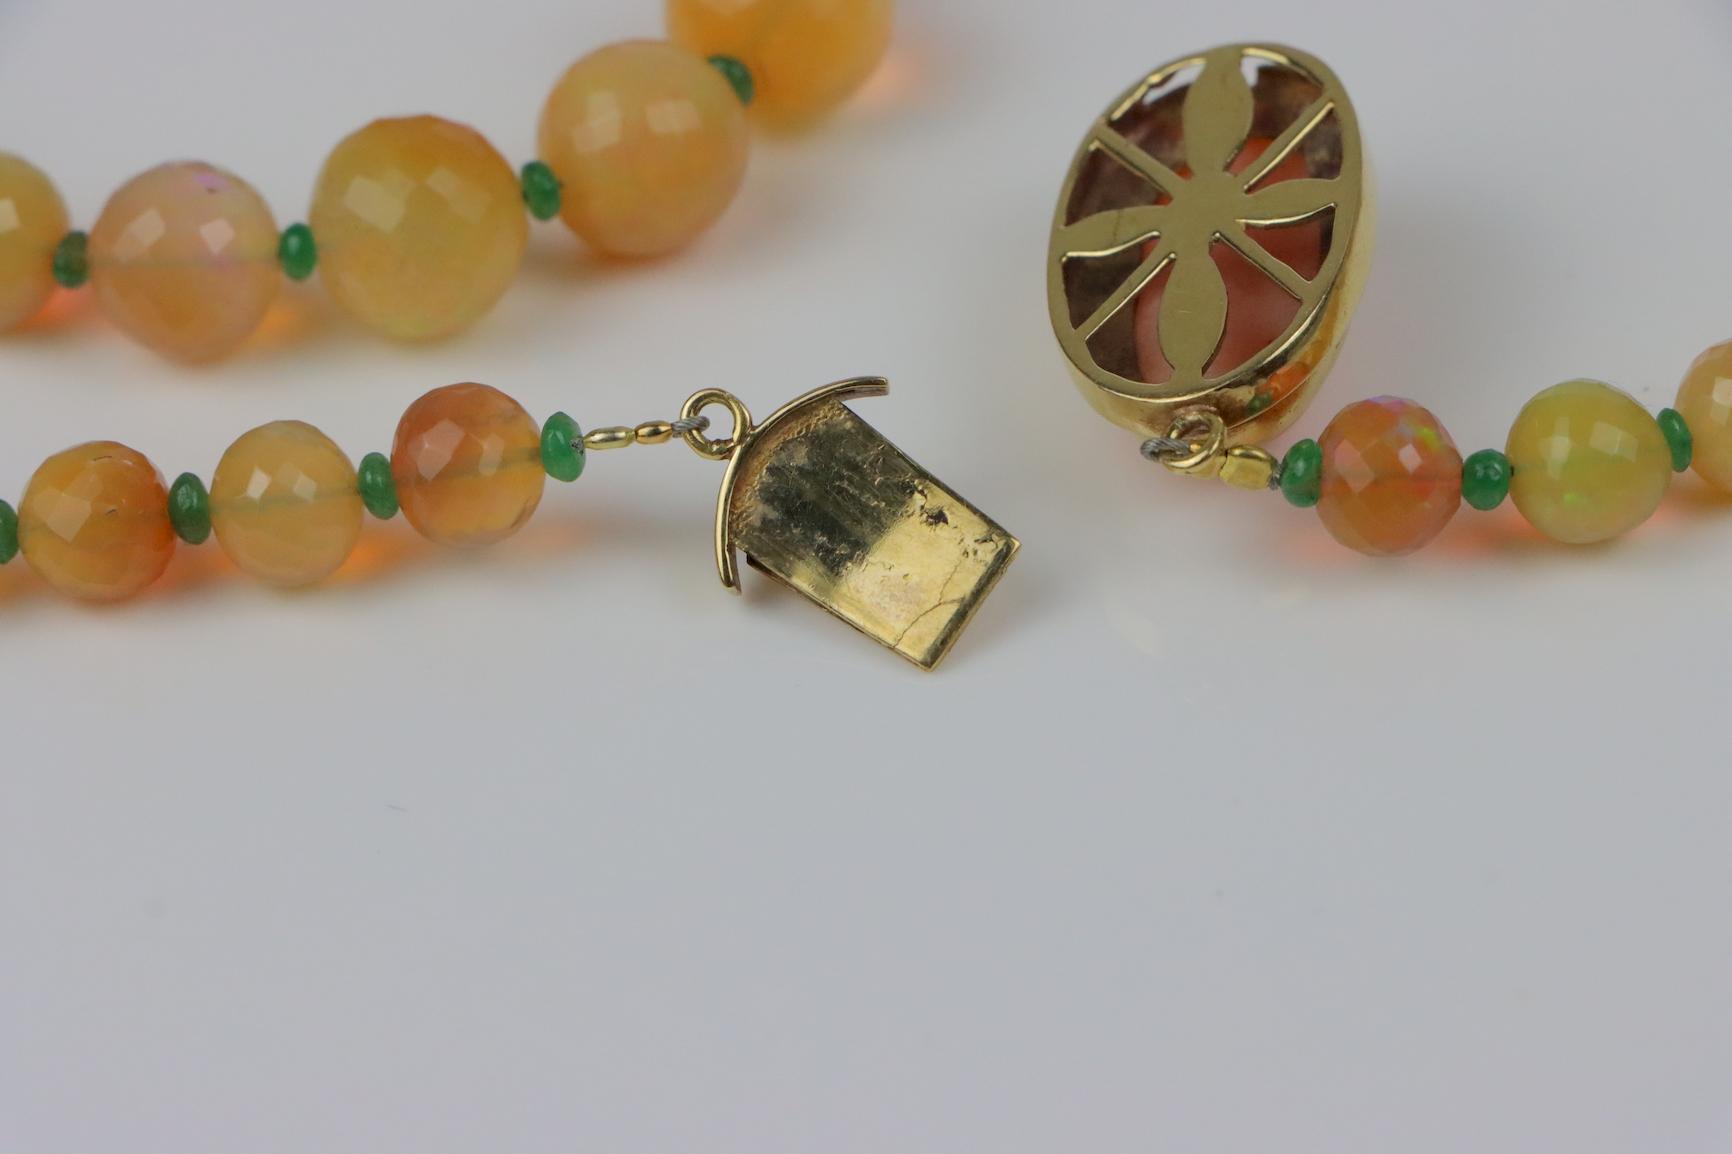 A 14K Gold Opal Emerald and Coral Bead Necklace